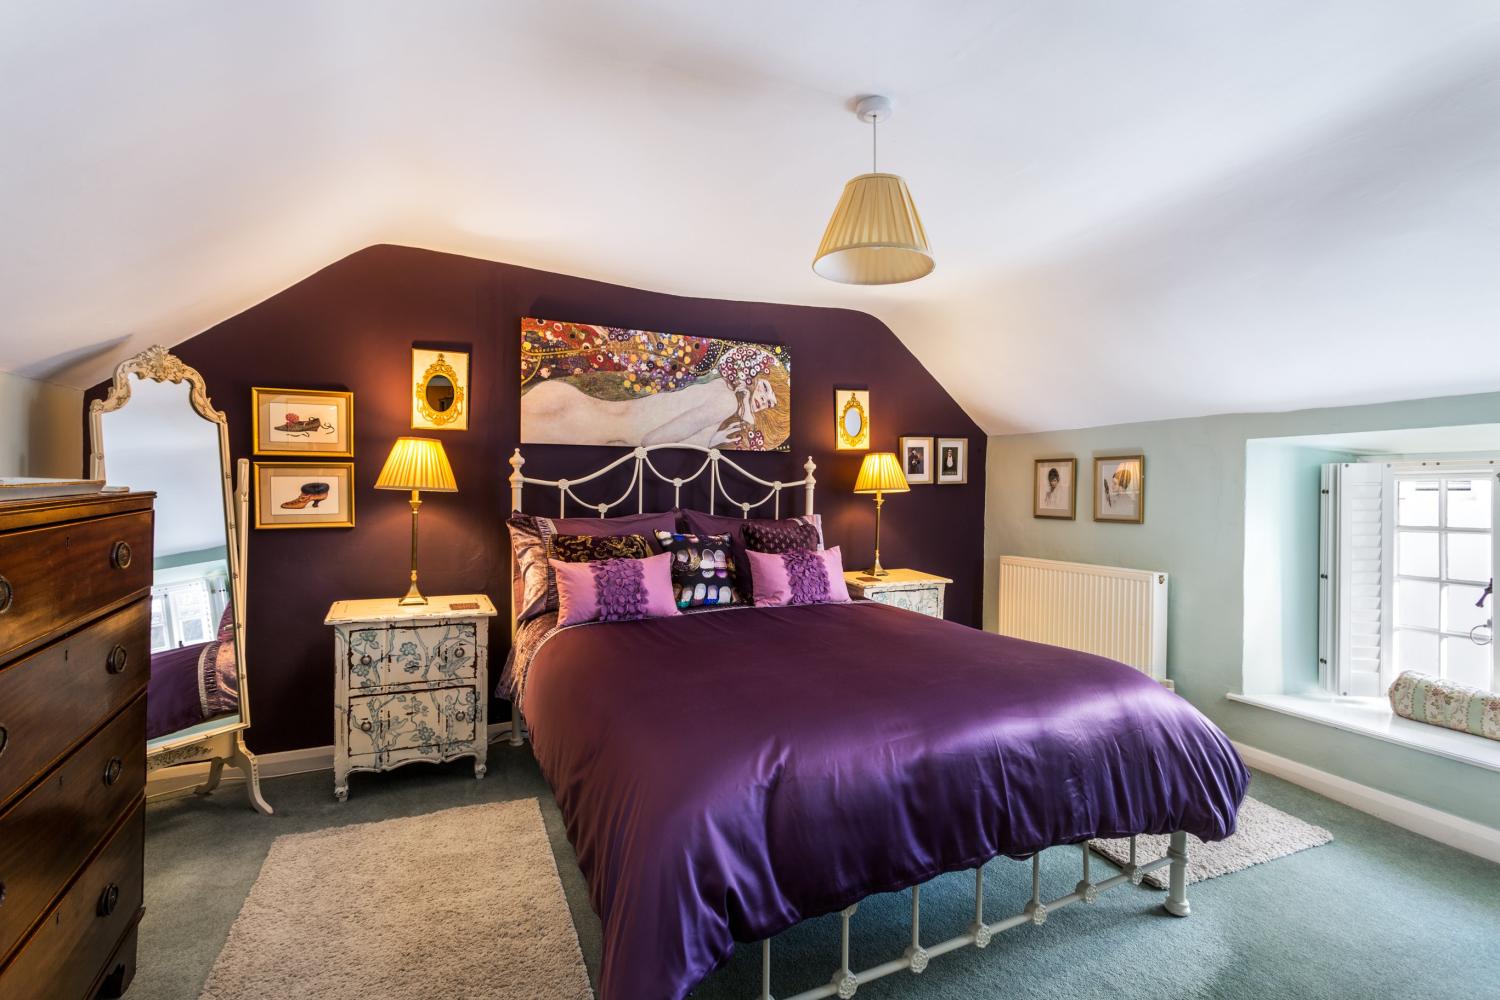 'Vogue' is a large king en-suite bedroom with views down Church Street.